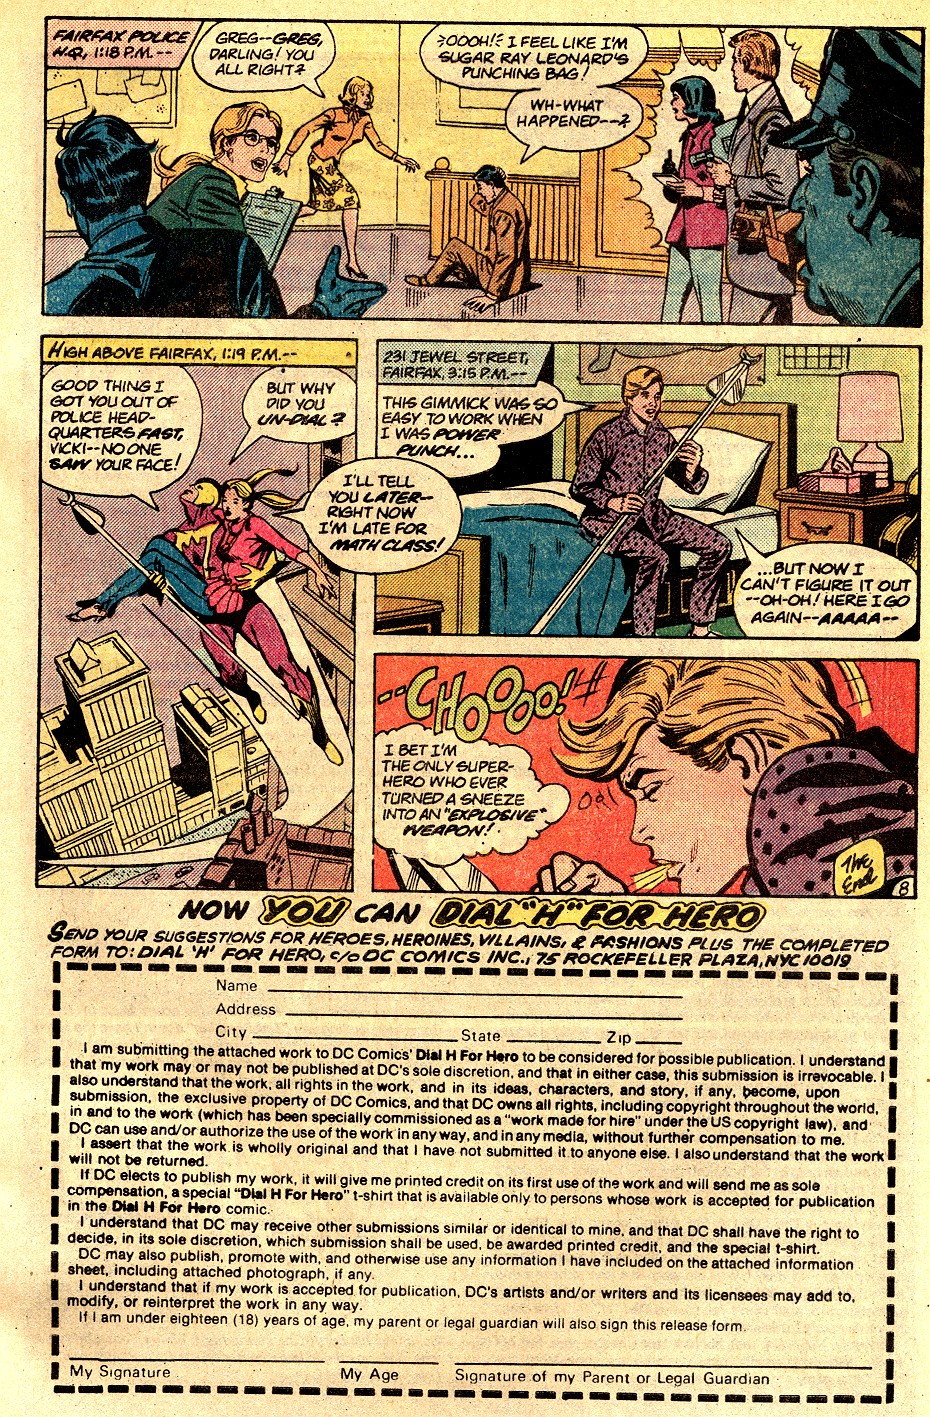 The New Adventures of Superboy 32 Page 32